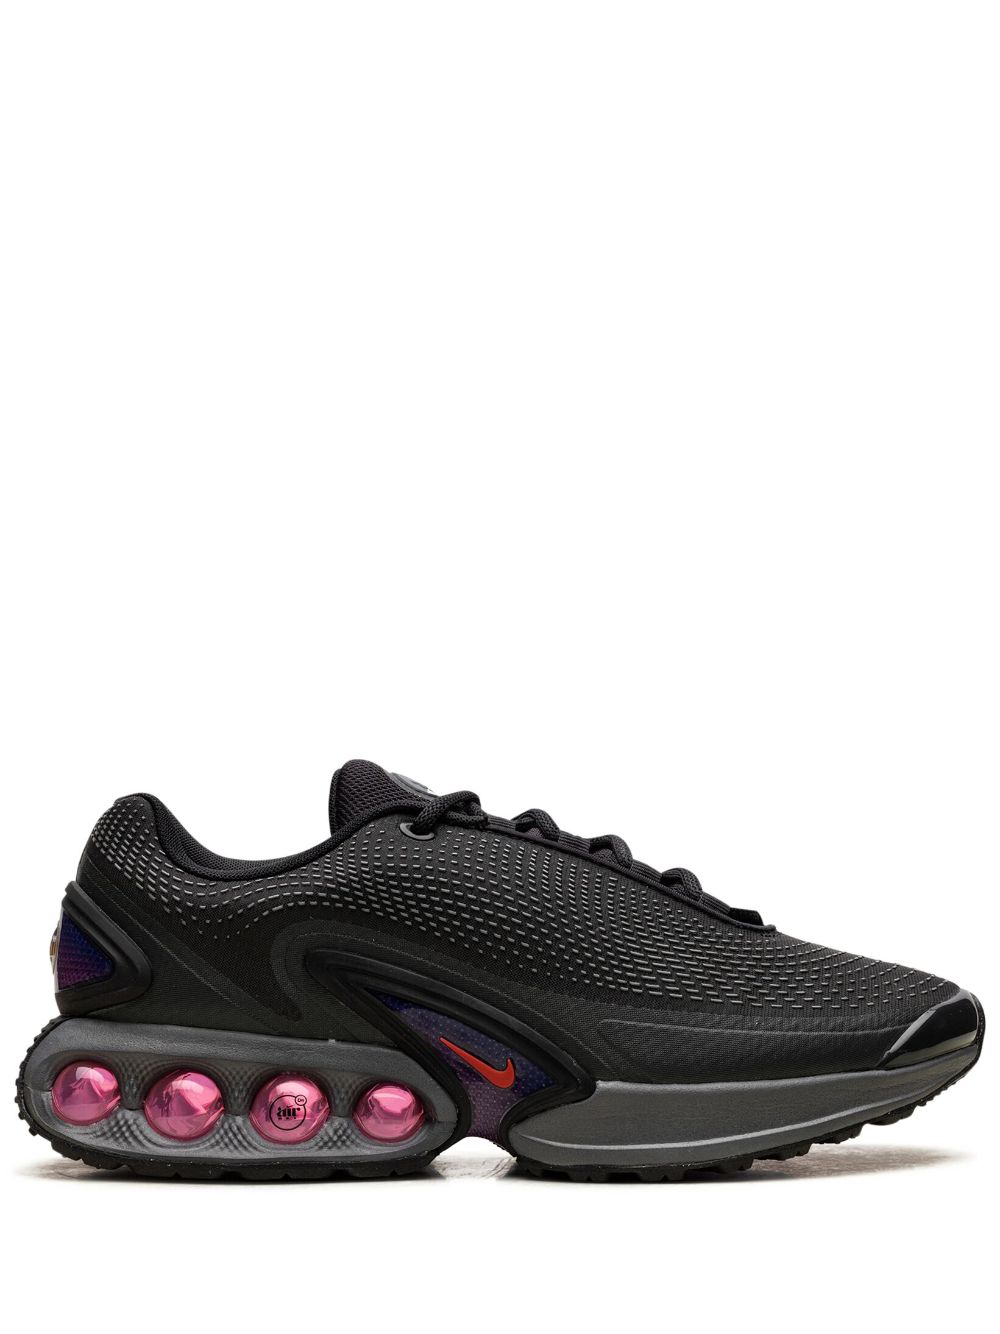 Air Max Dn "All Night" sneakers